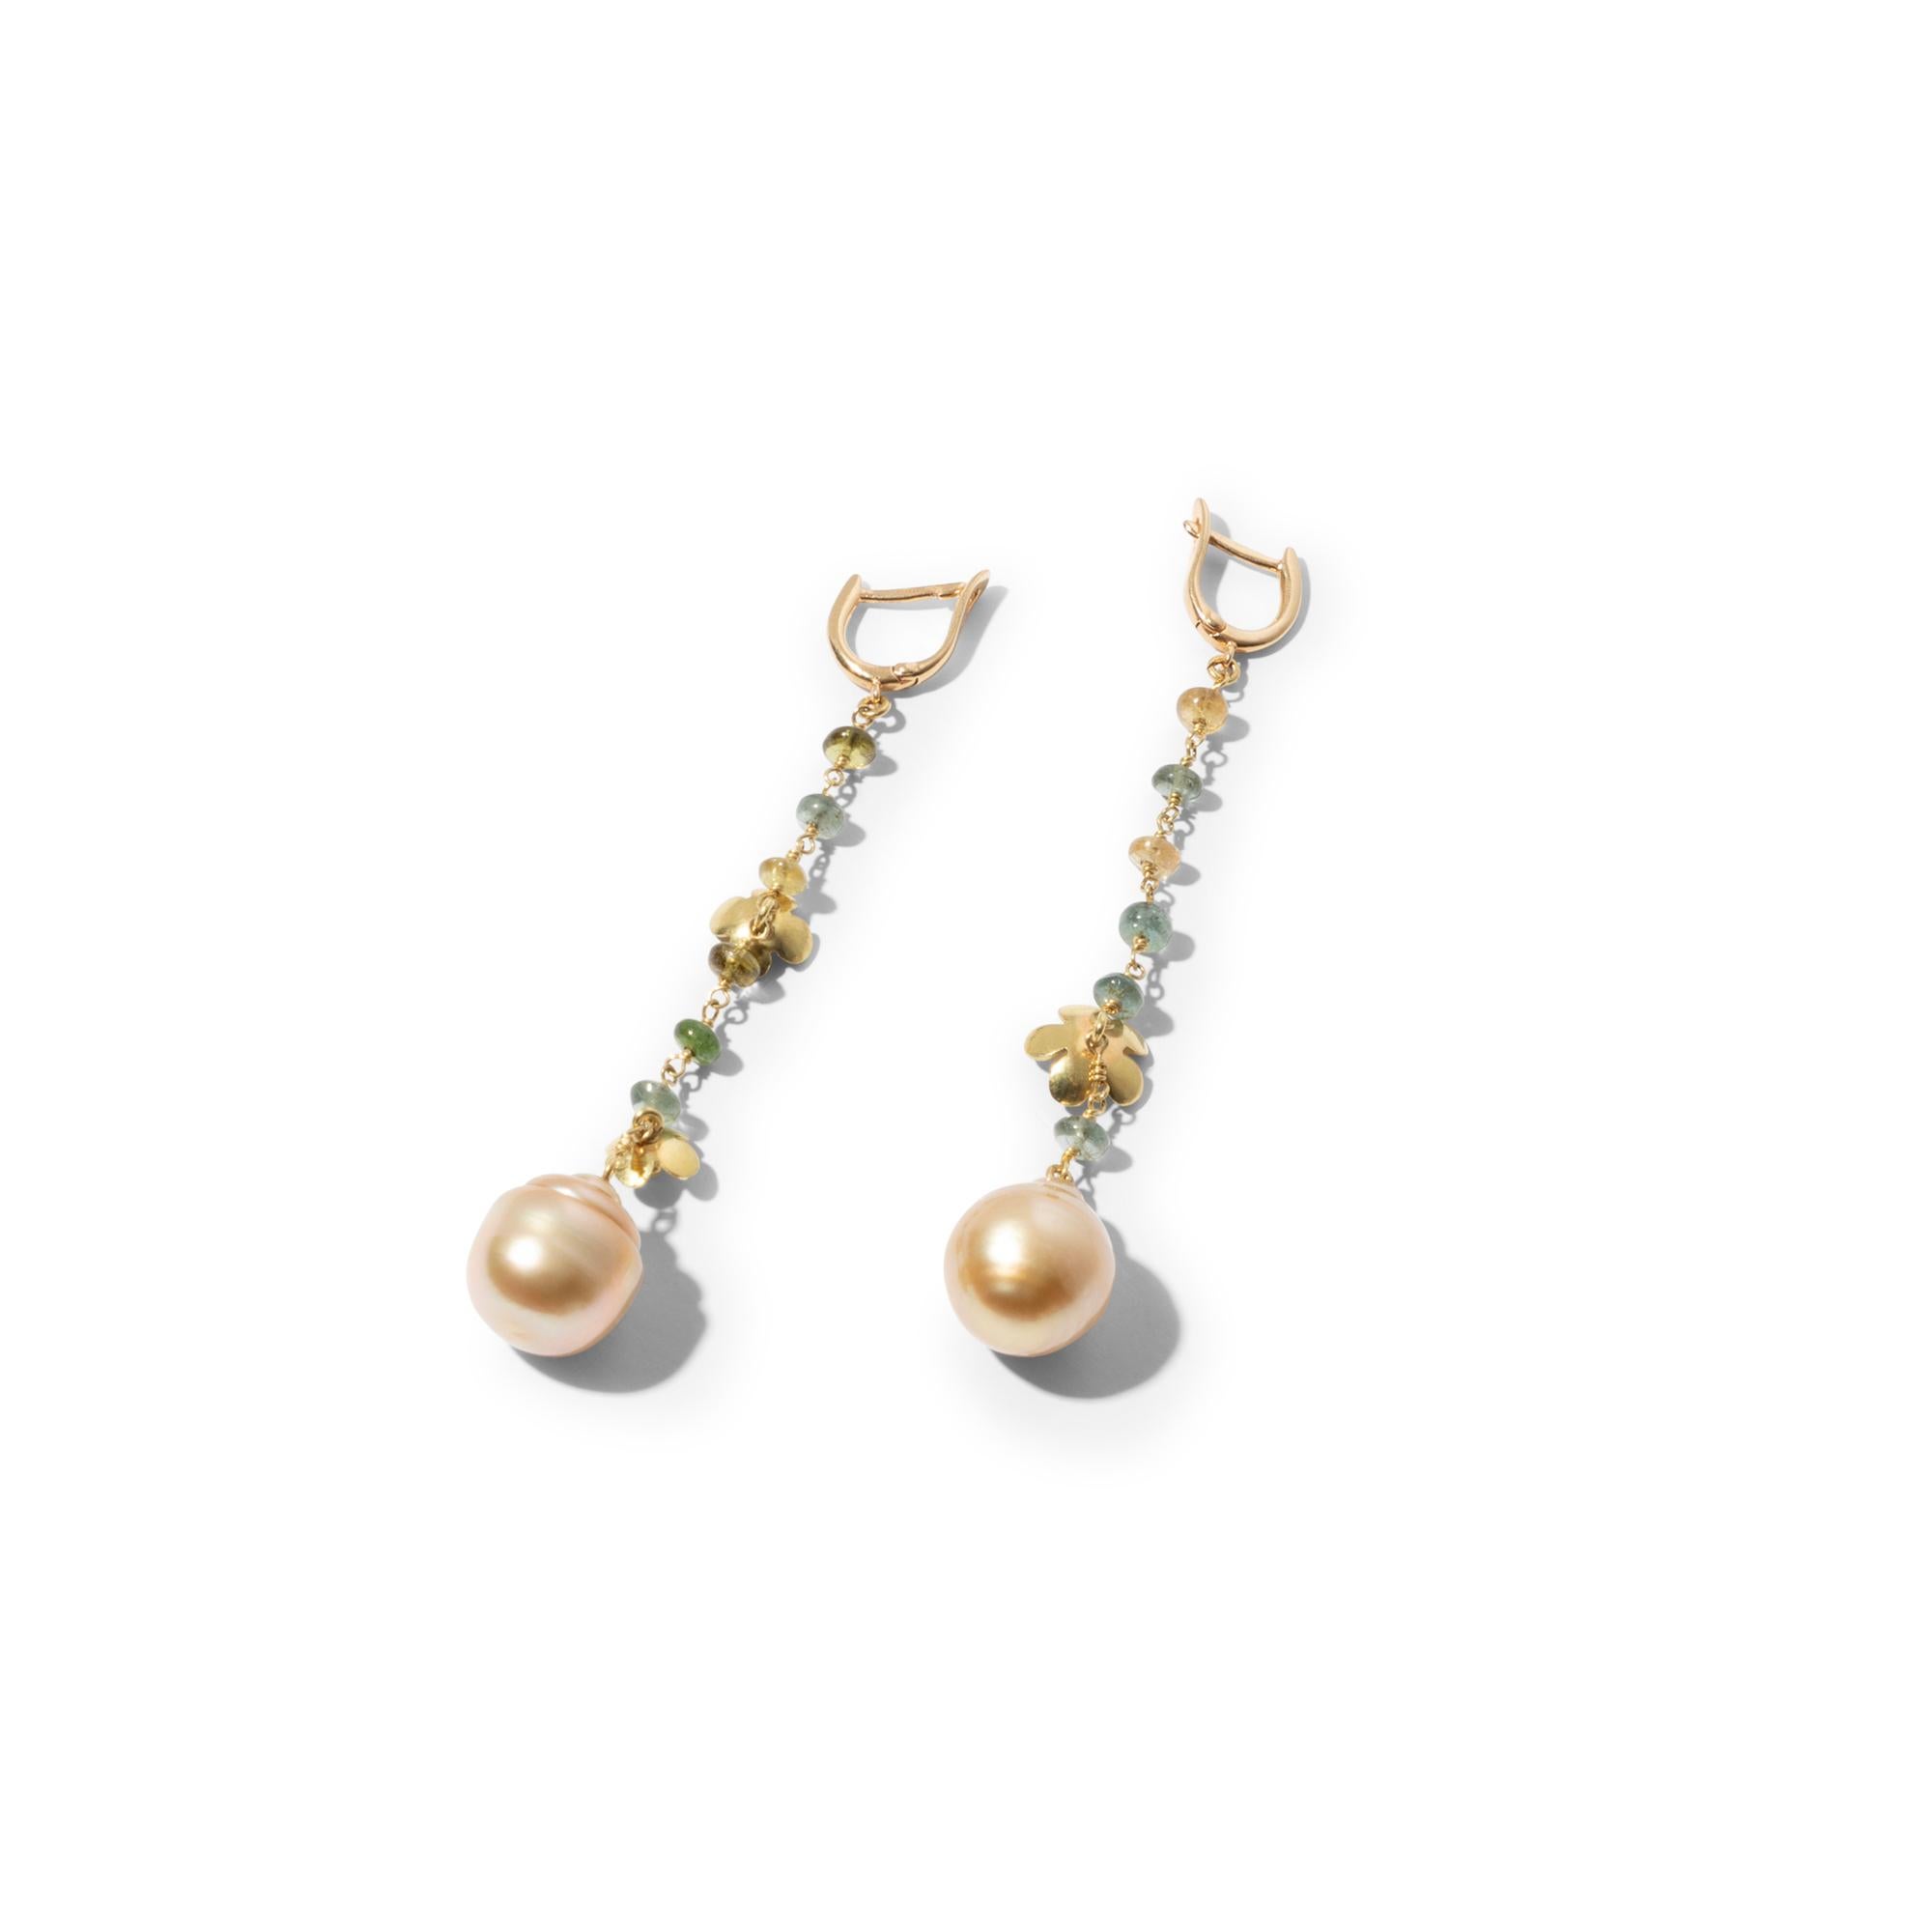 Very delicate and feminine one-of-a-kind pair of earrings with golden yellow South Sea pearls and dainty little golden flowers. This asymmetrical pair features two baroque South Sea pearls of exceptional beauty with great golden lustre. It strikes